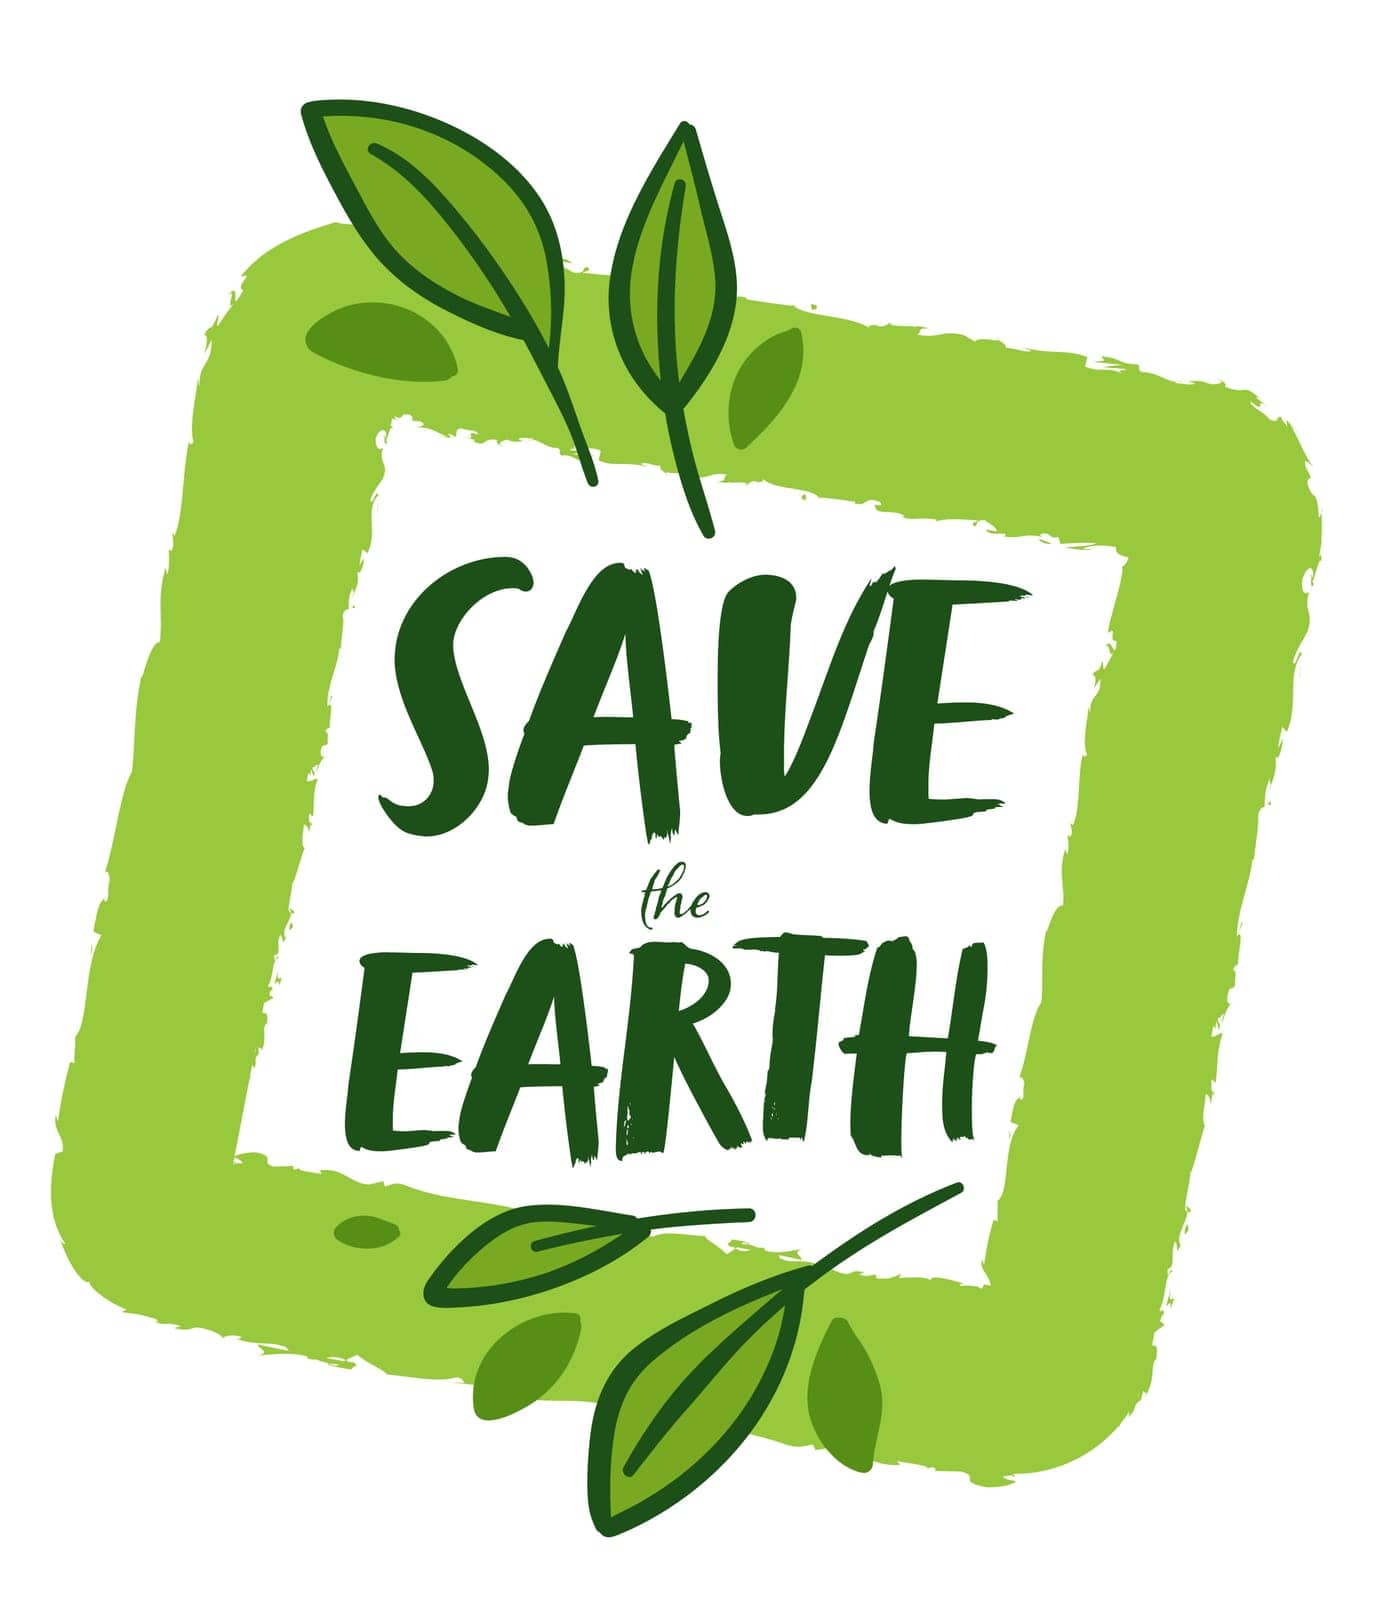 Save earth environmental and ecological protection by Sonulkaster